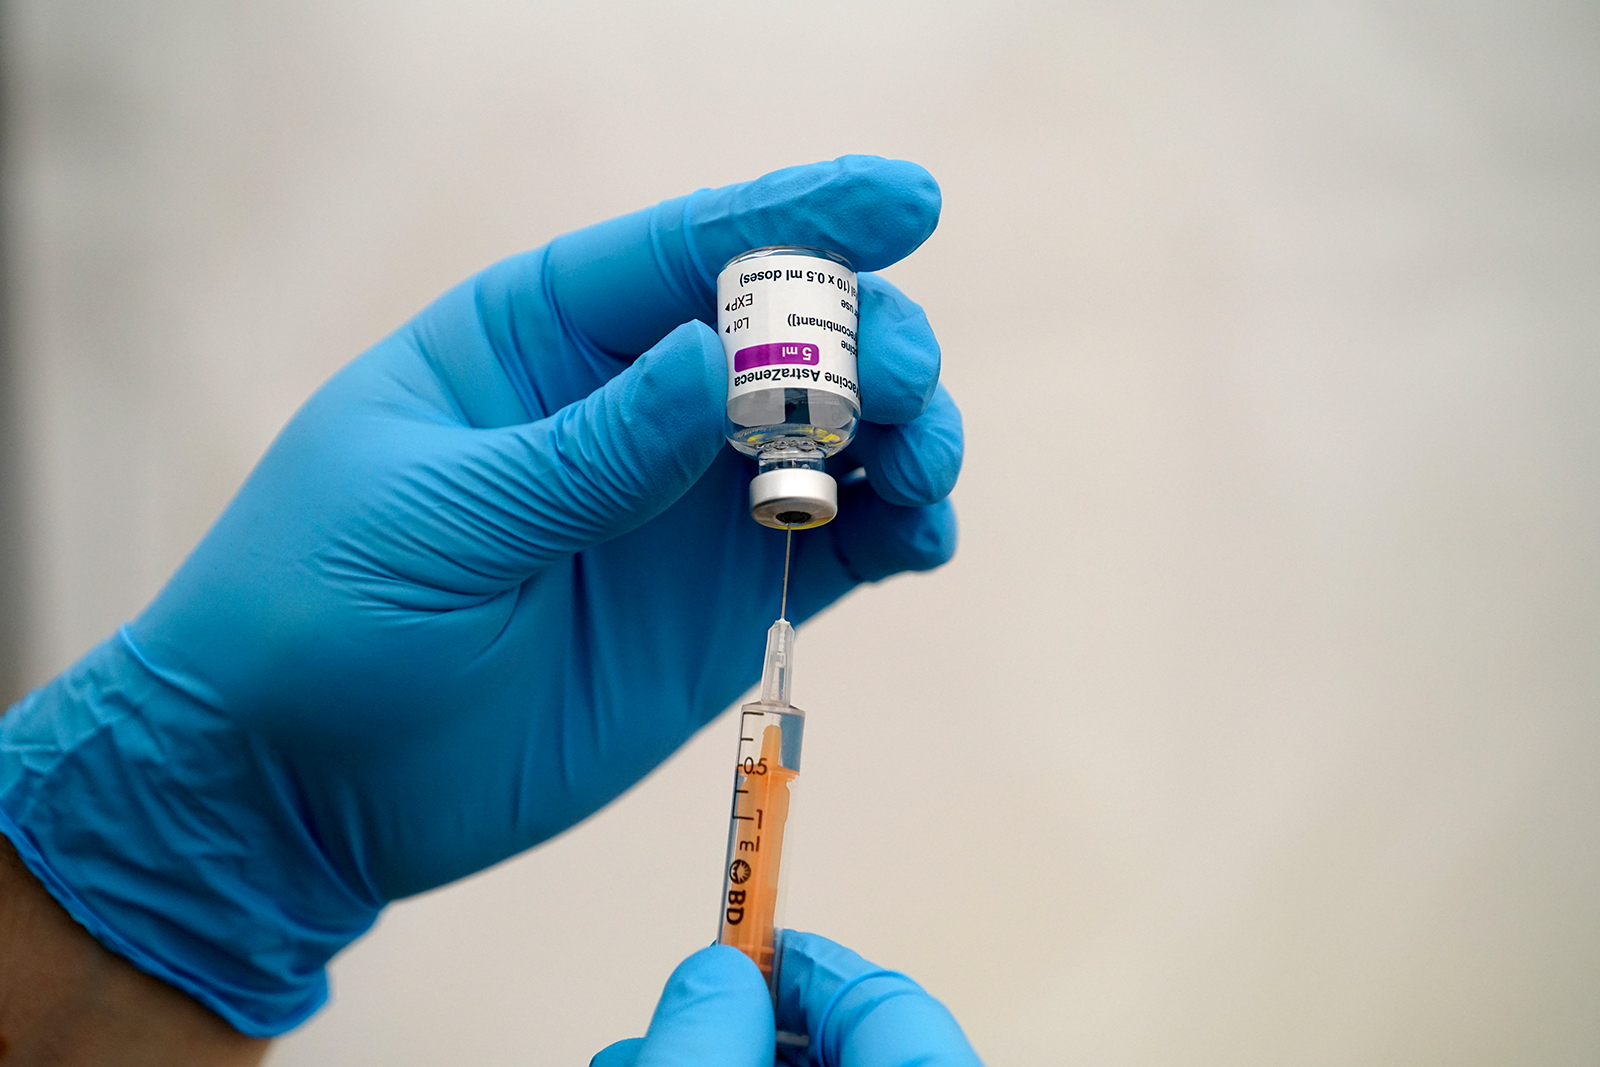 An NHS staff member prepares an AstraZeneca Covid-19 vaccination near Truro, England, on January 26.